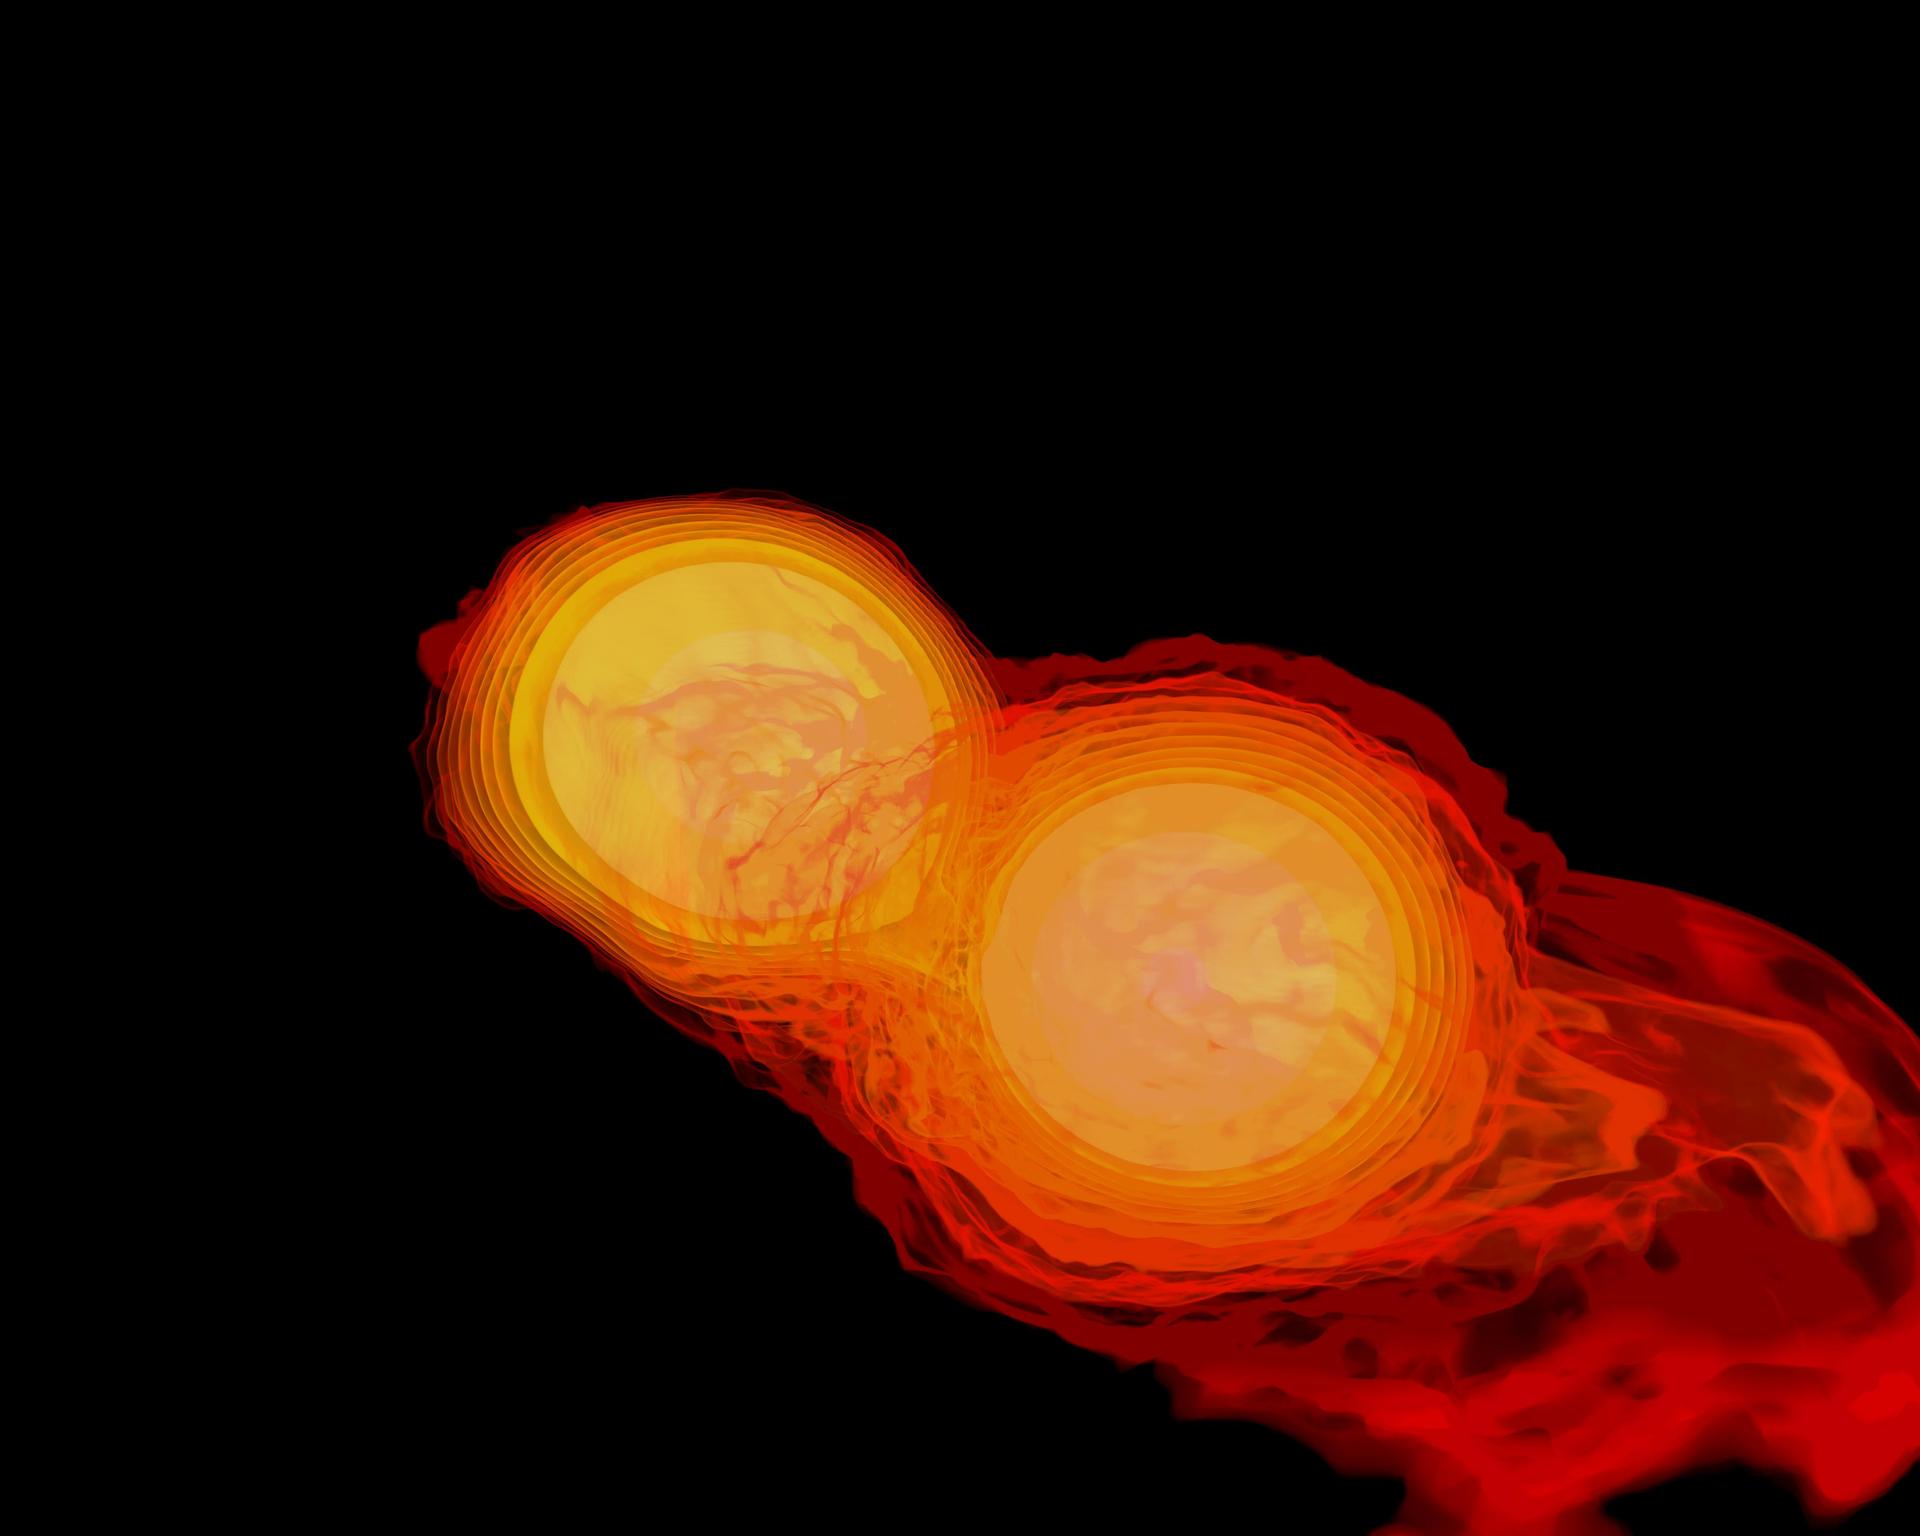 This supercomputa simulation shows one of da most thugged-out violent events up in tha universe: a pair of neutron stars colliding, mergin n' formin a funky-ass black hole.